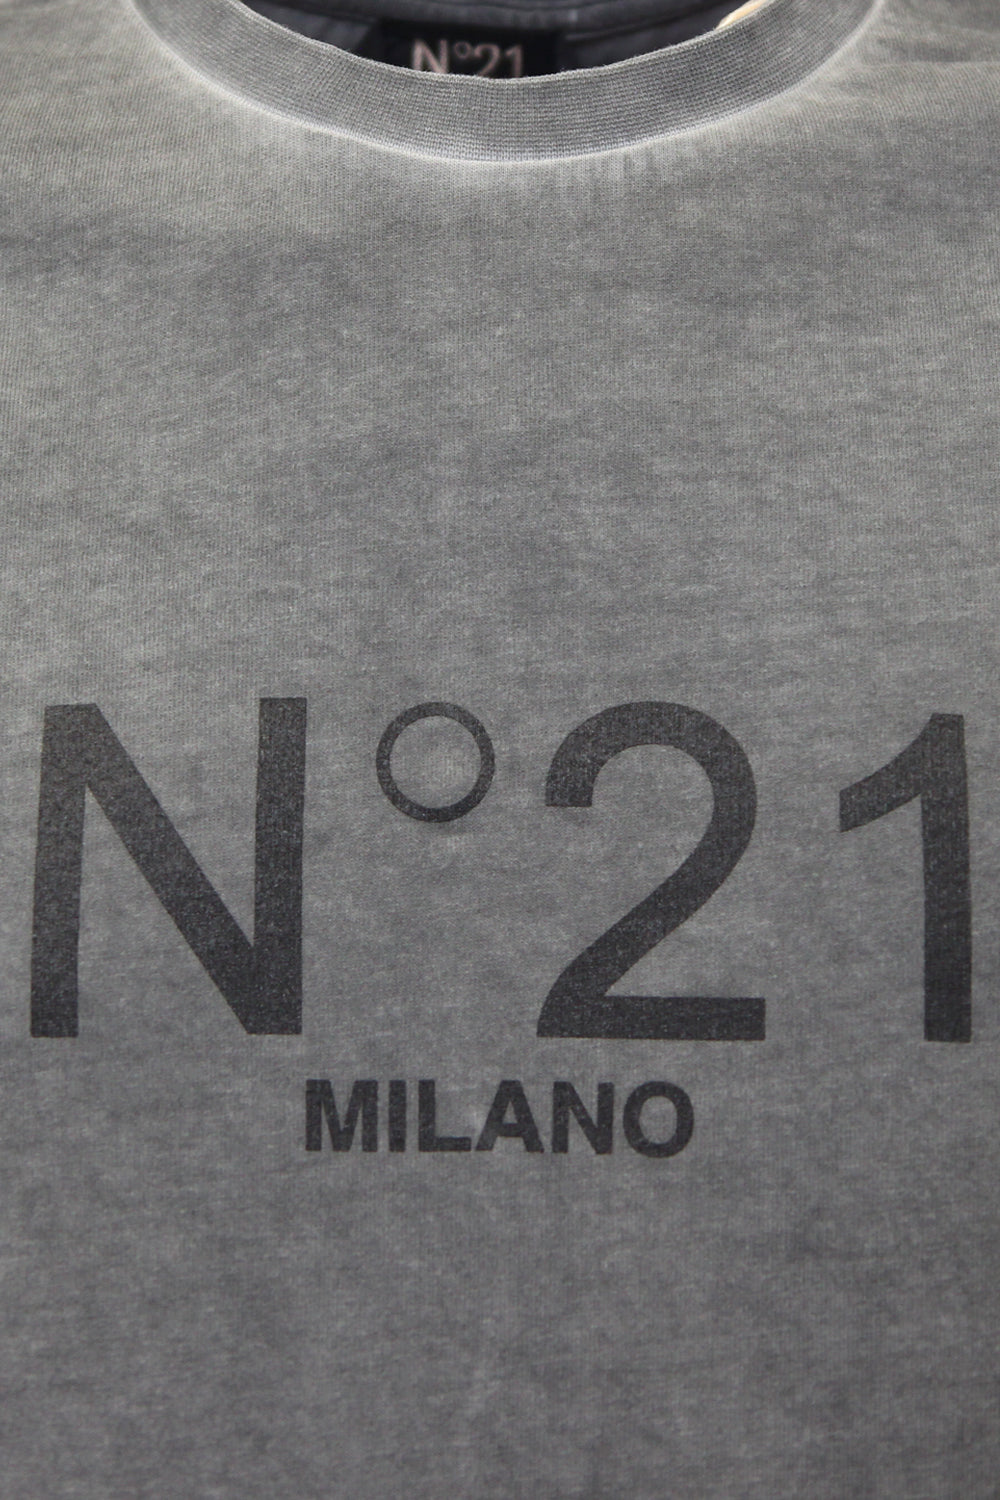 N21 T-shirt in cotone con stampa